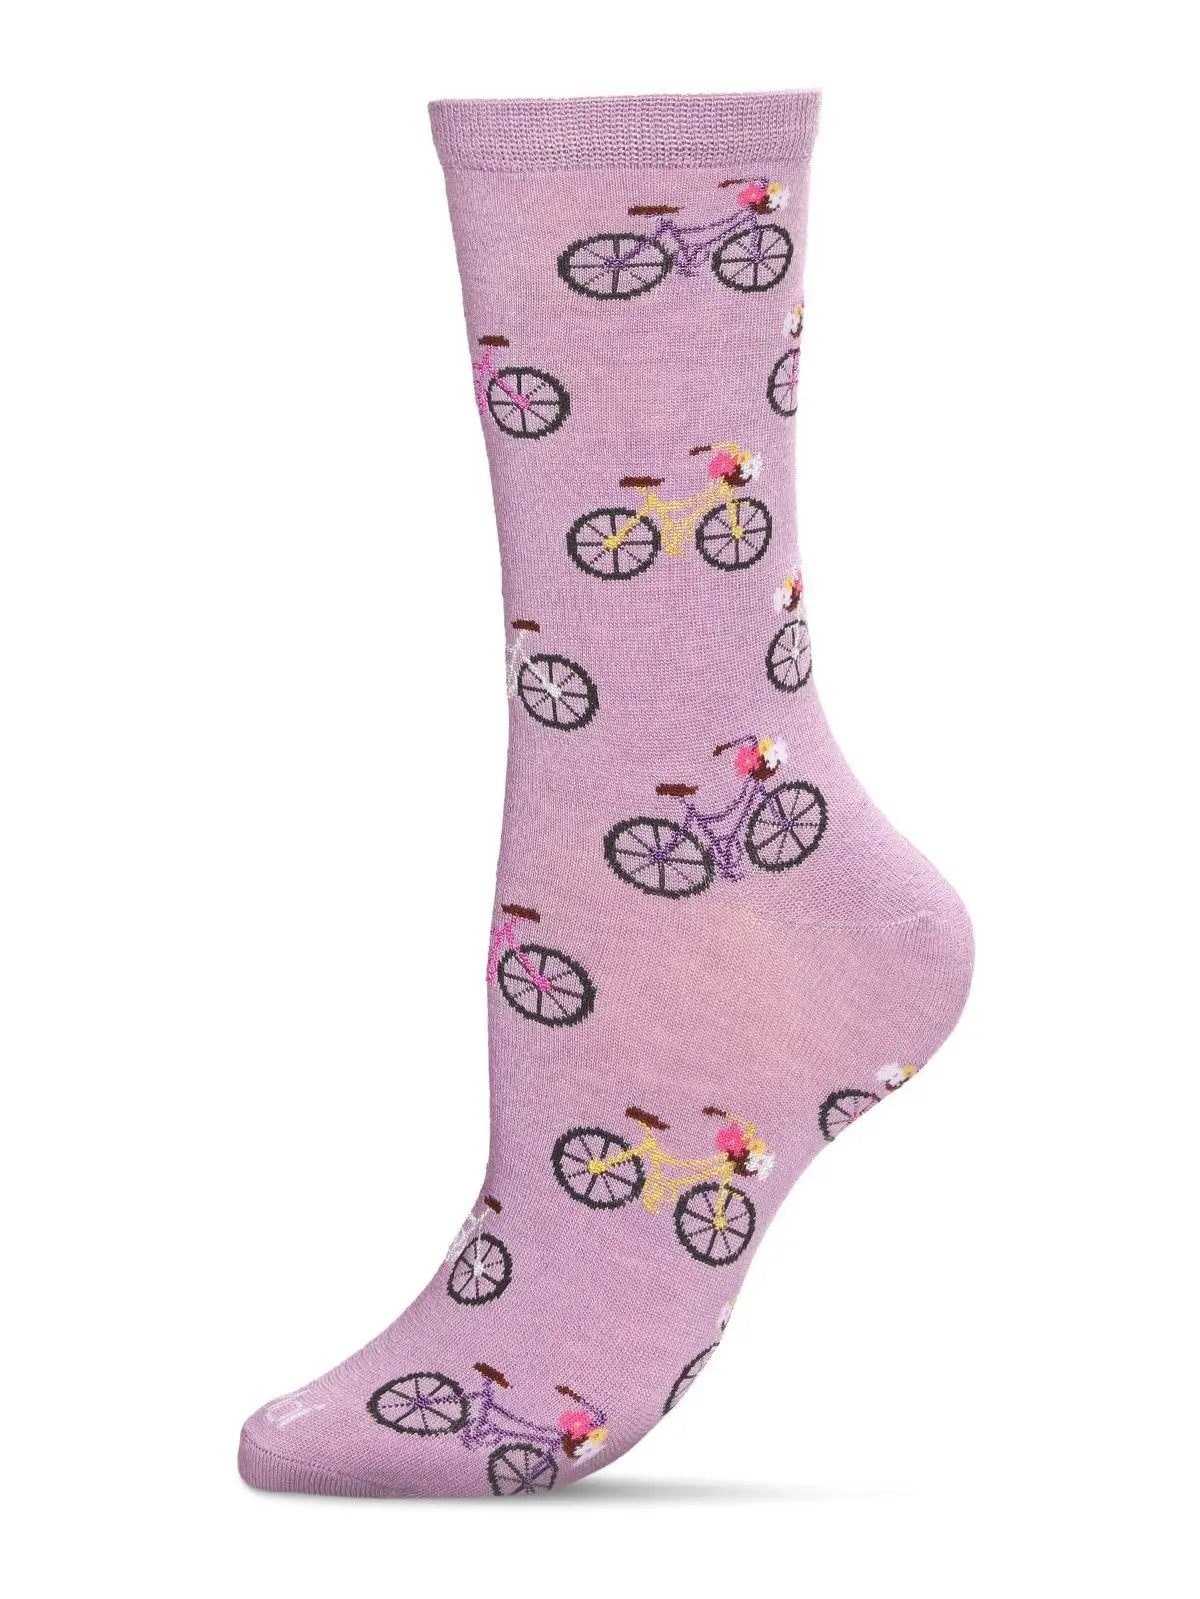 Time to Ride Bicycles Bamboo Crew Socks - Multiple Colors